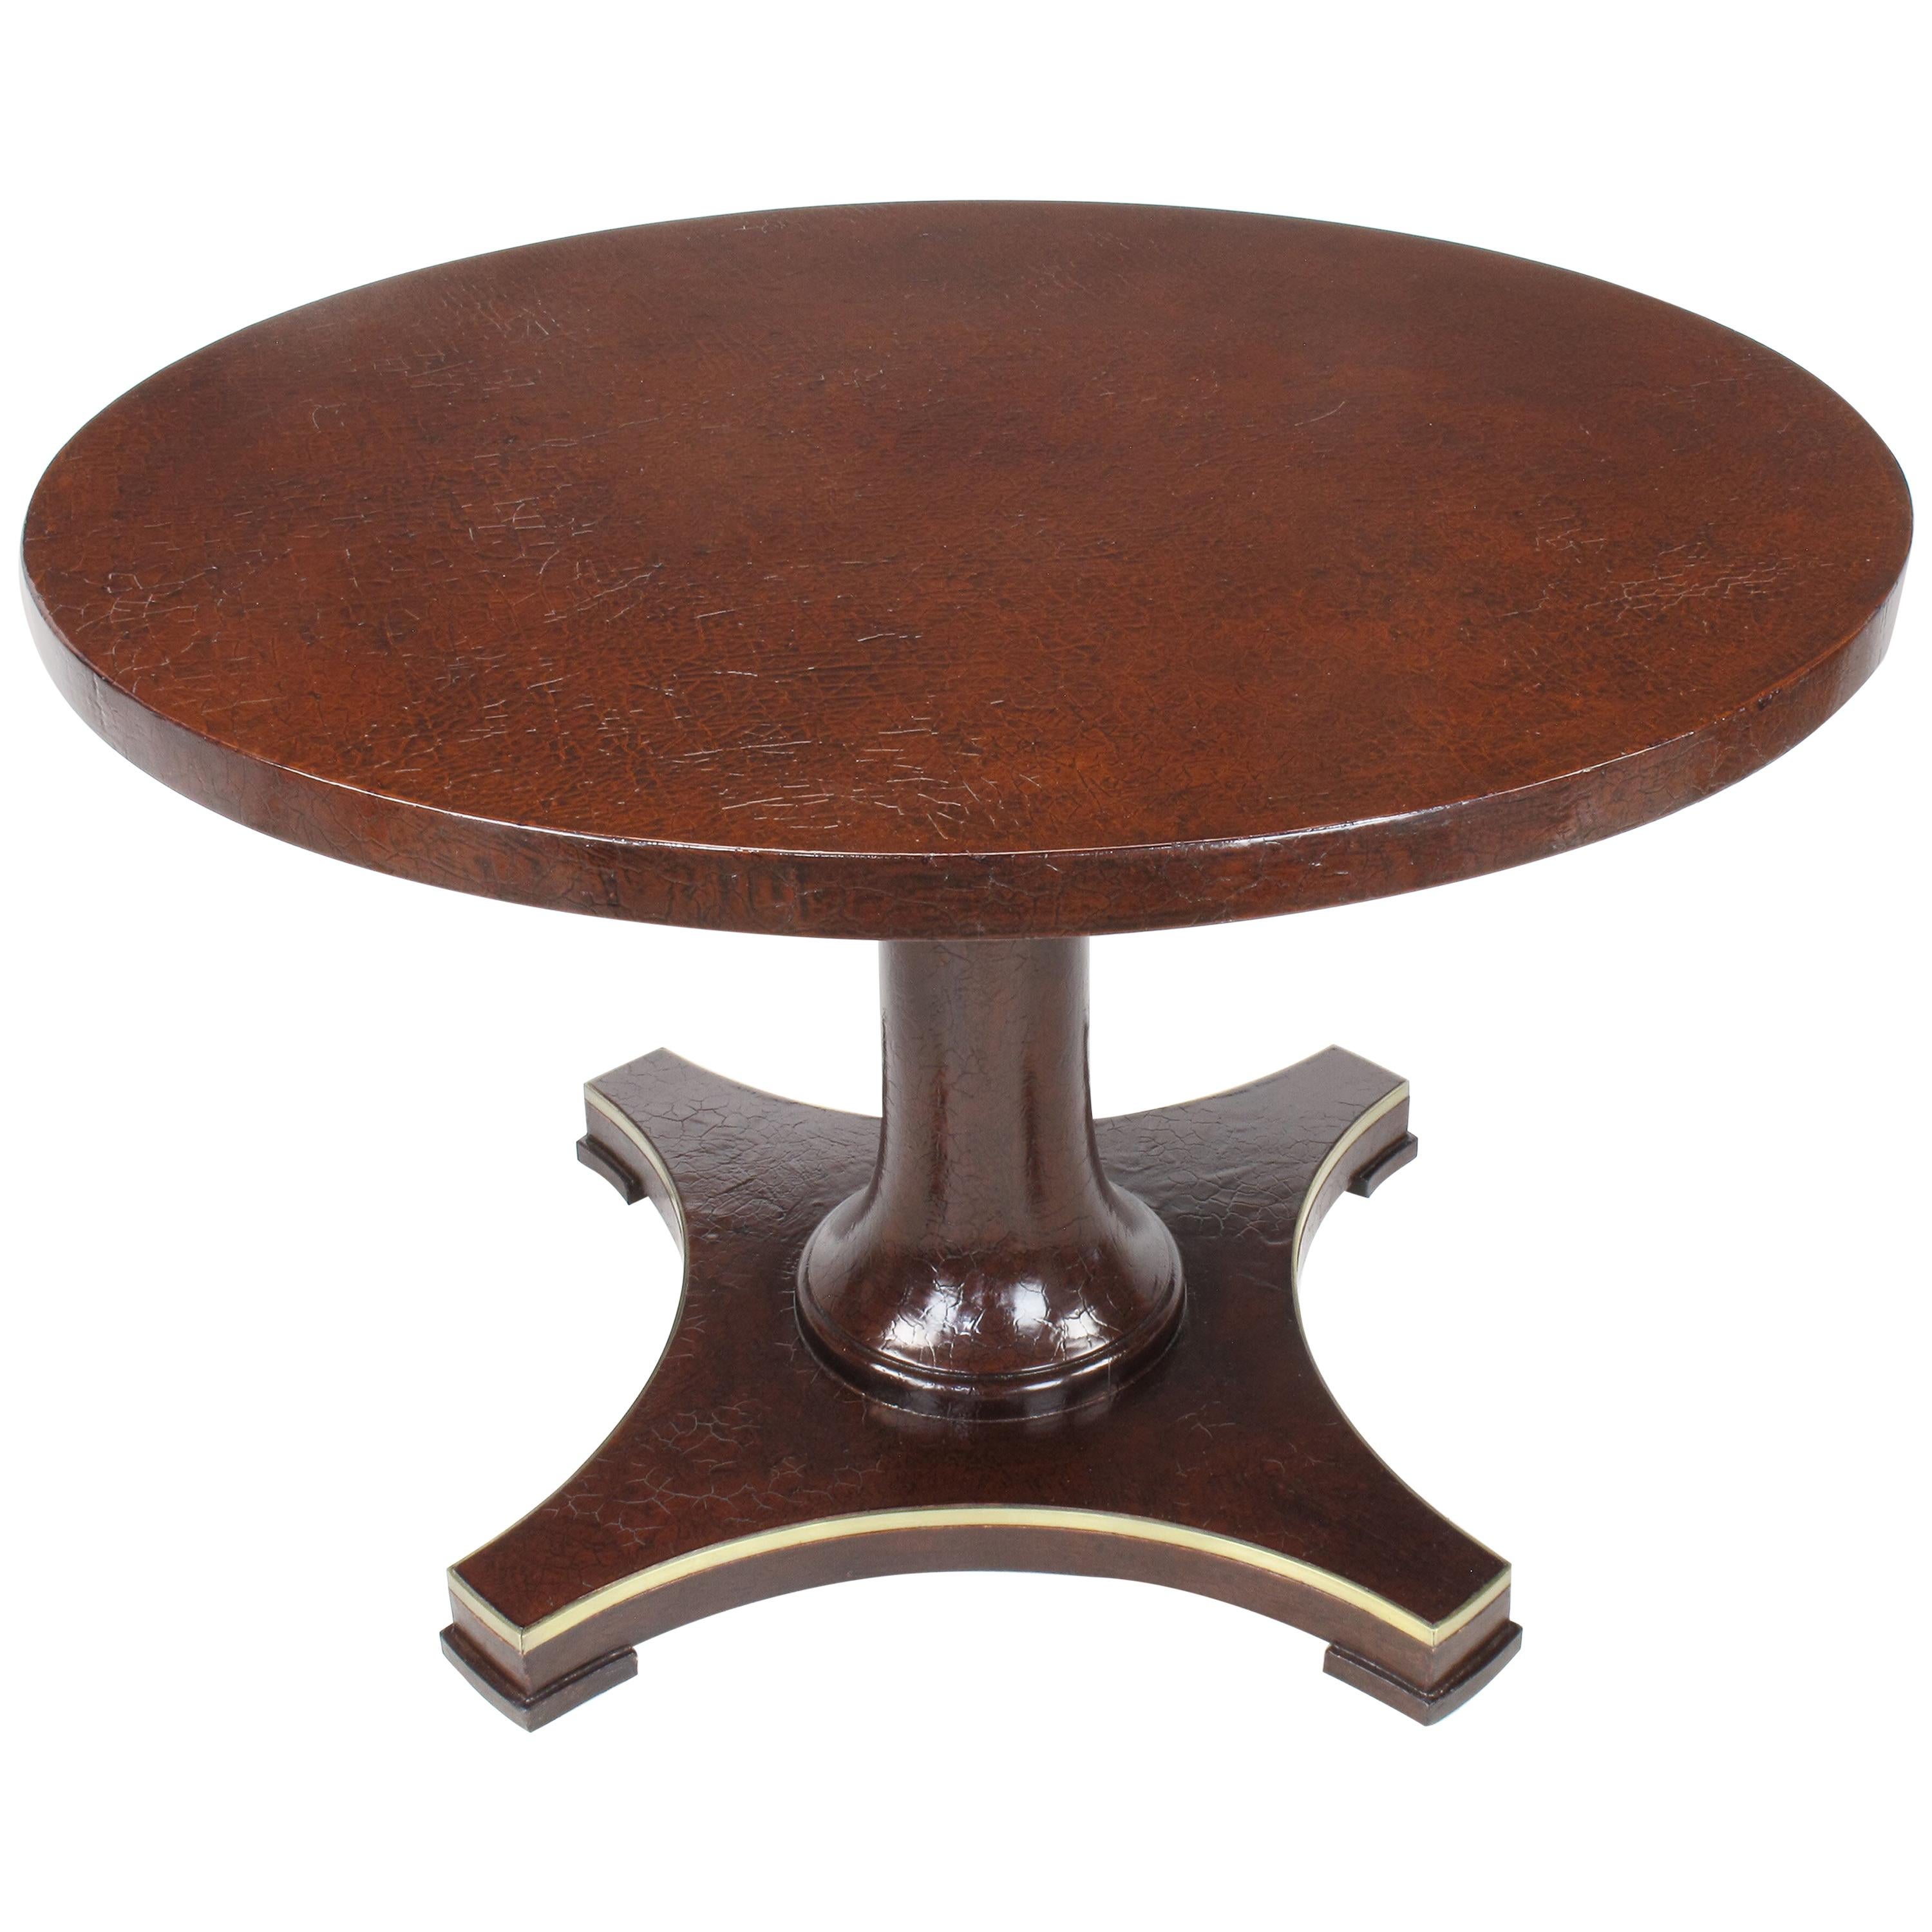 Baker Furniture Pedestal Games Table with Craquelure Finish